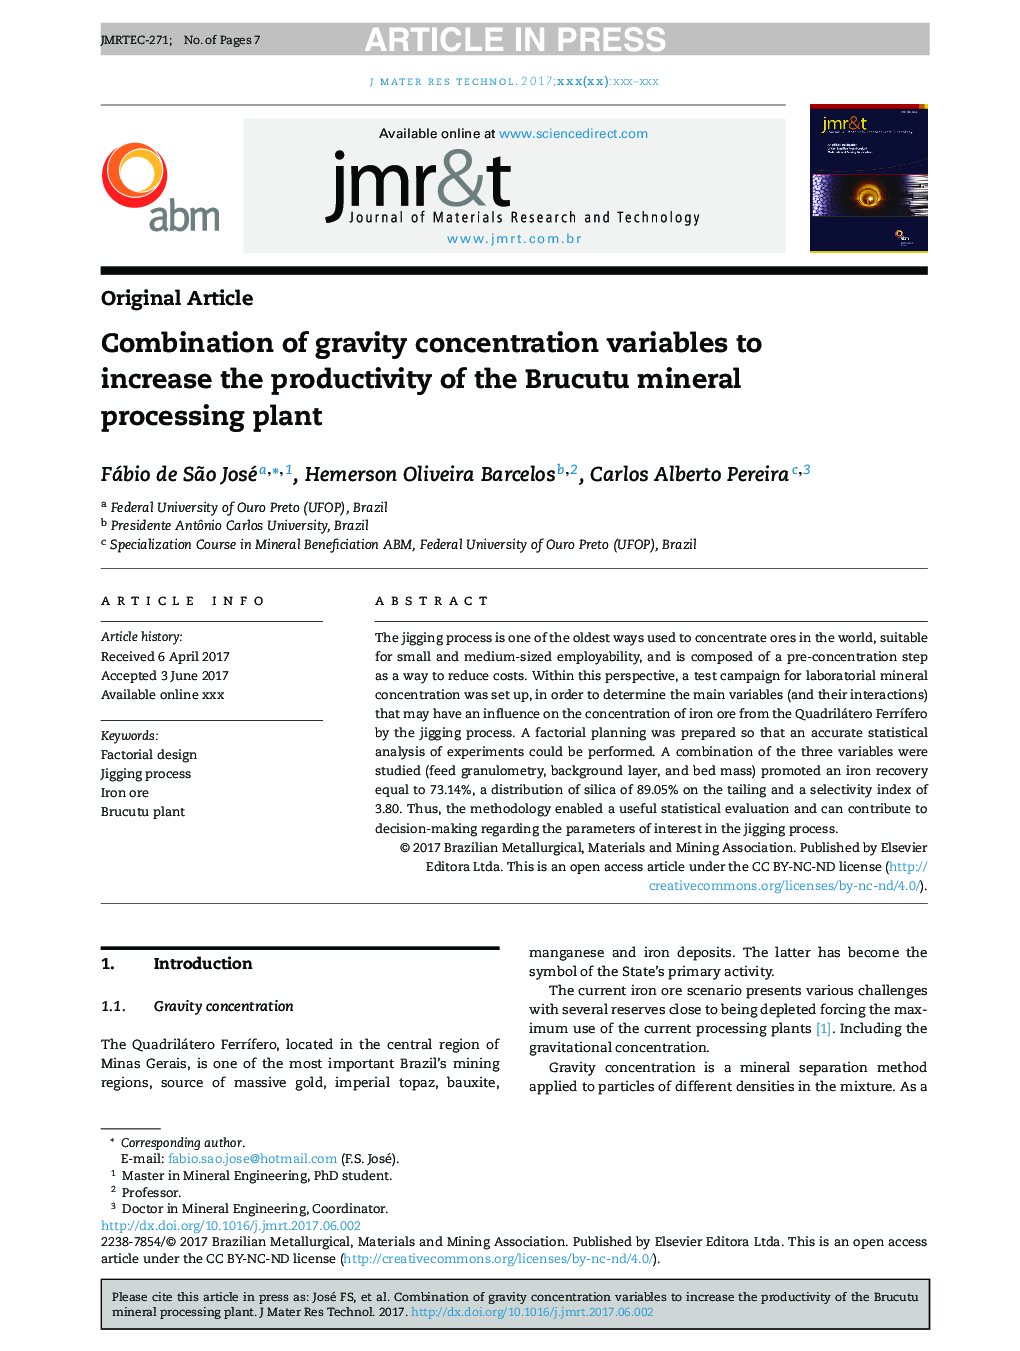 Combination of gravity concentration variables to increase the productivity of the Brucutu mineral processing plant